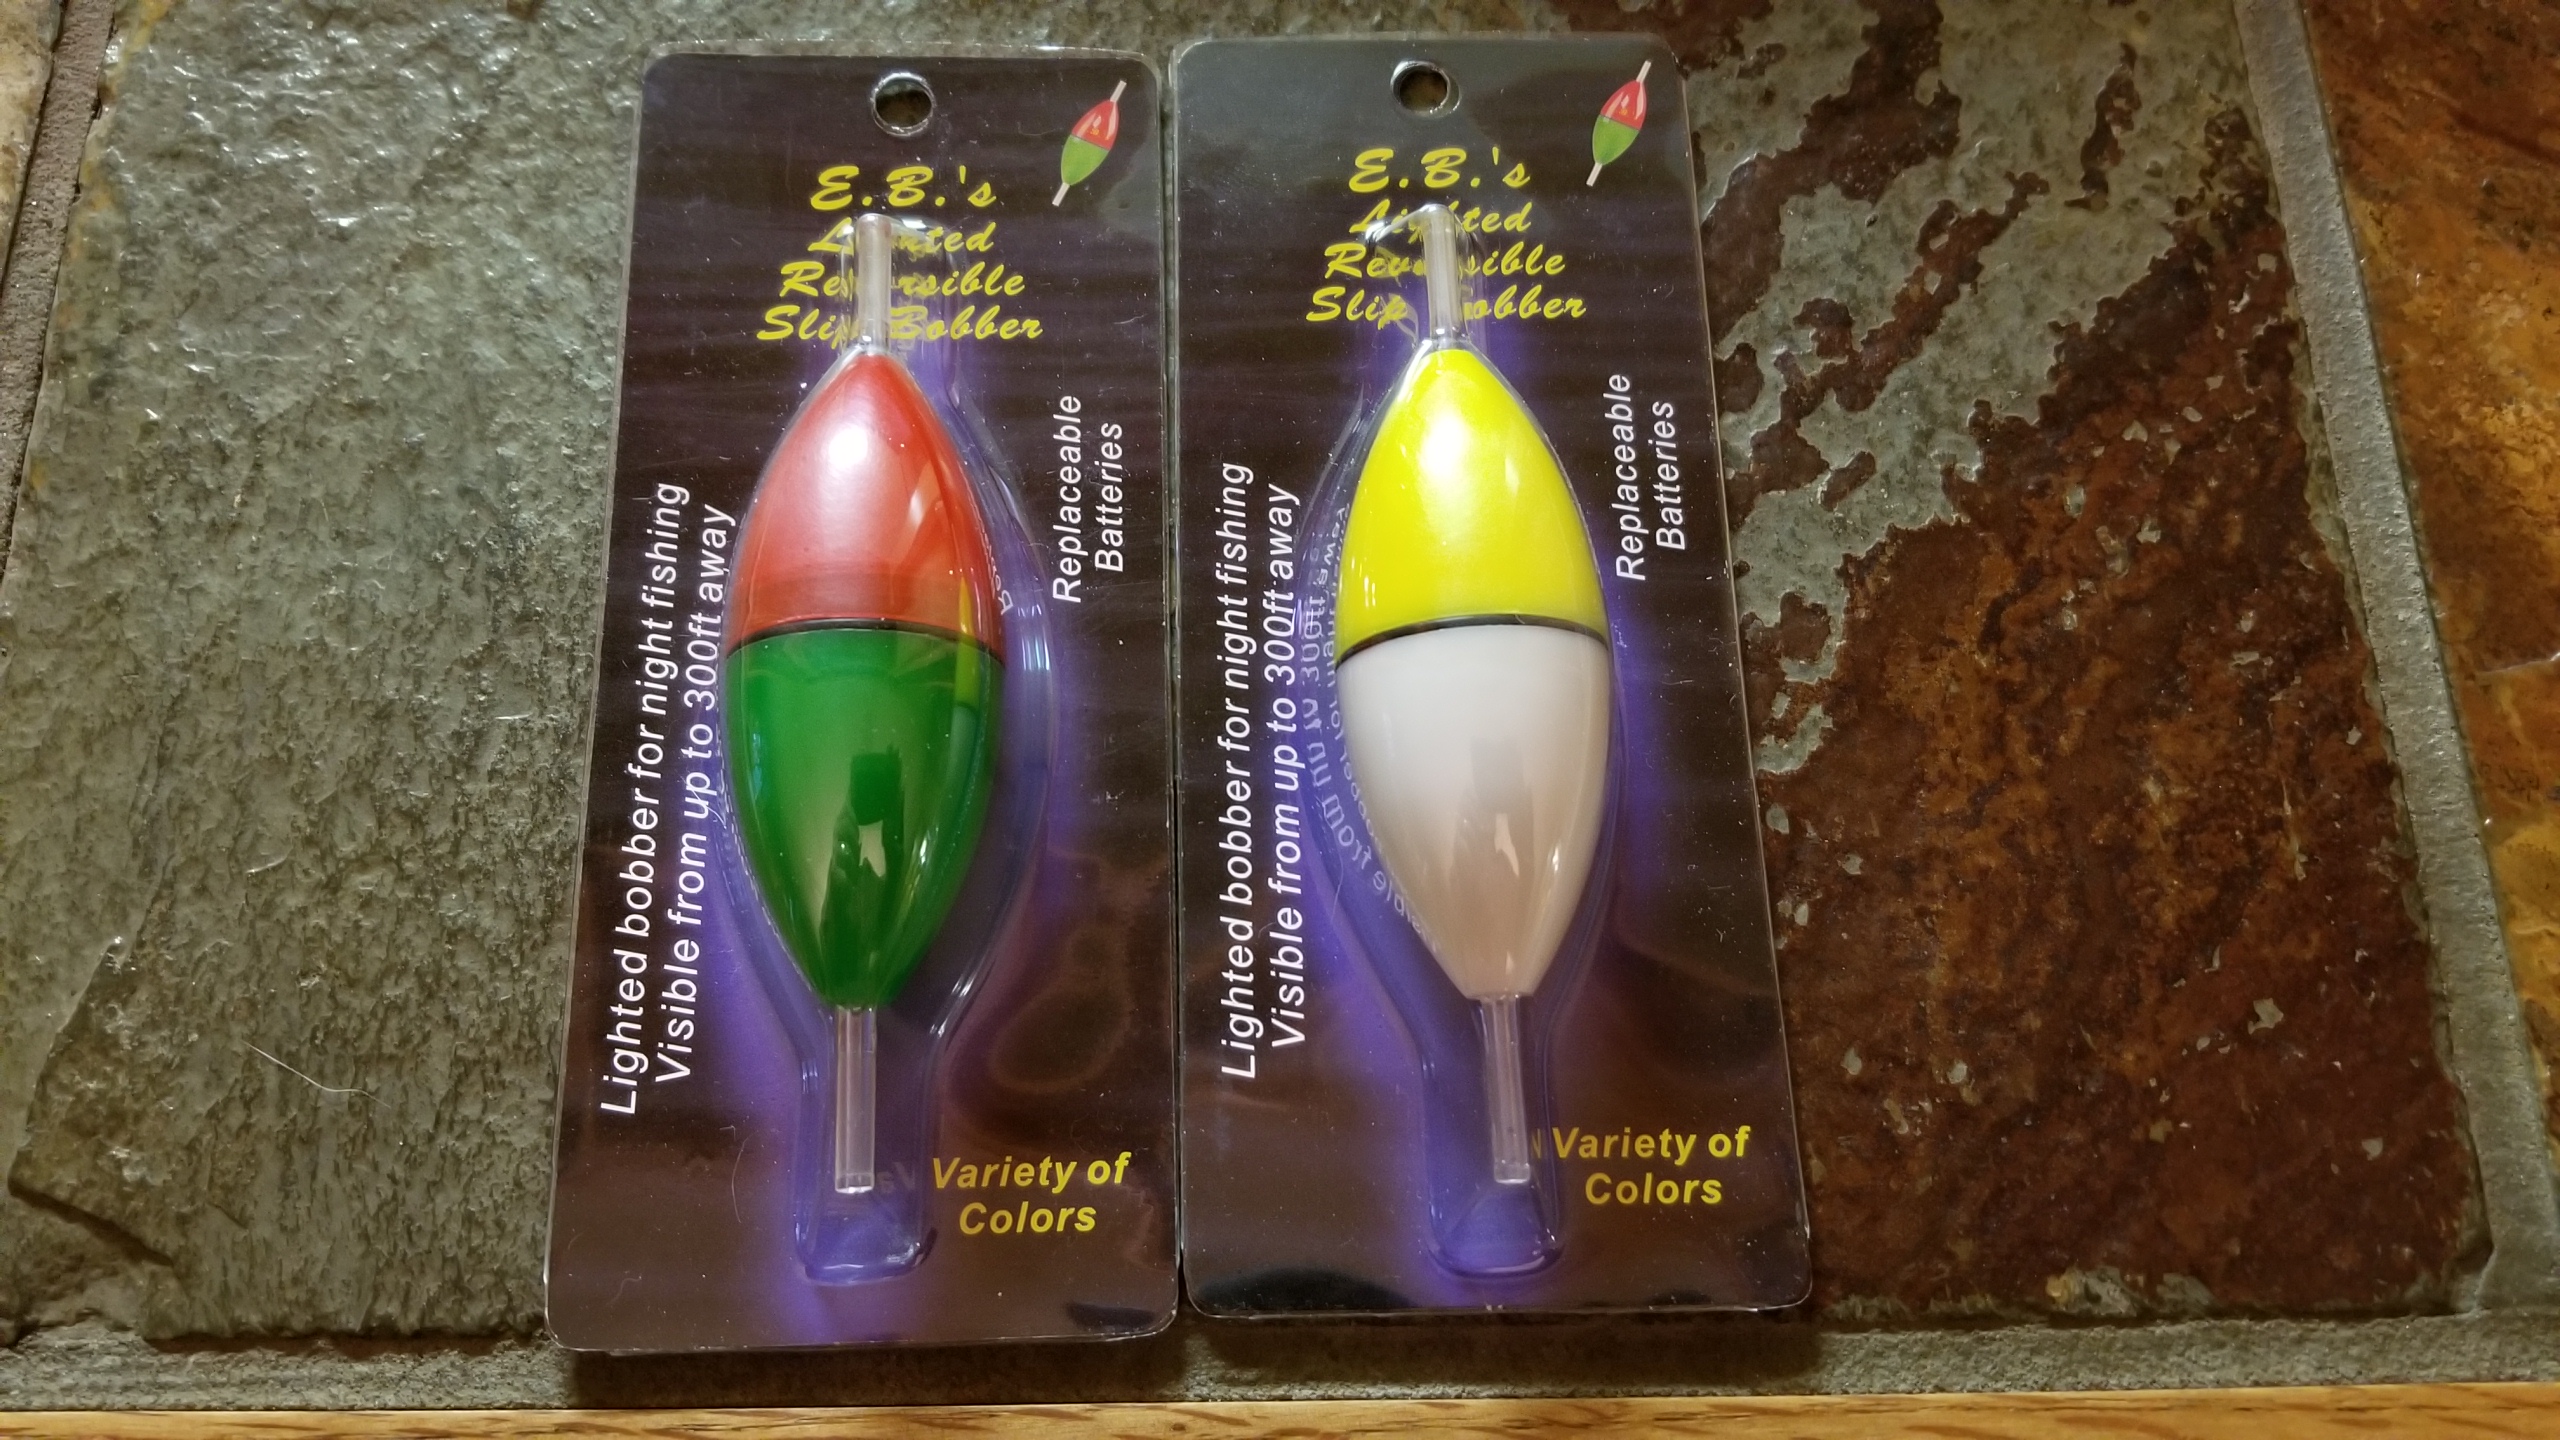 E. B.'s lighted bobbers - General Discussion Forum - General